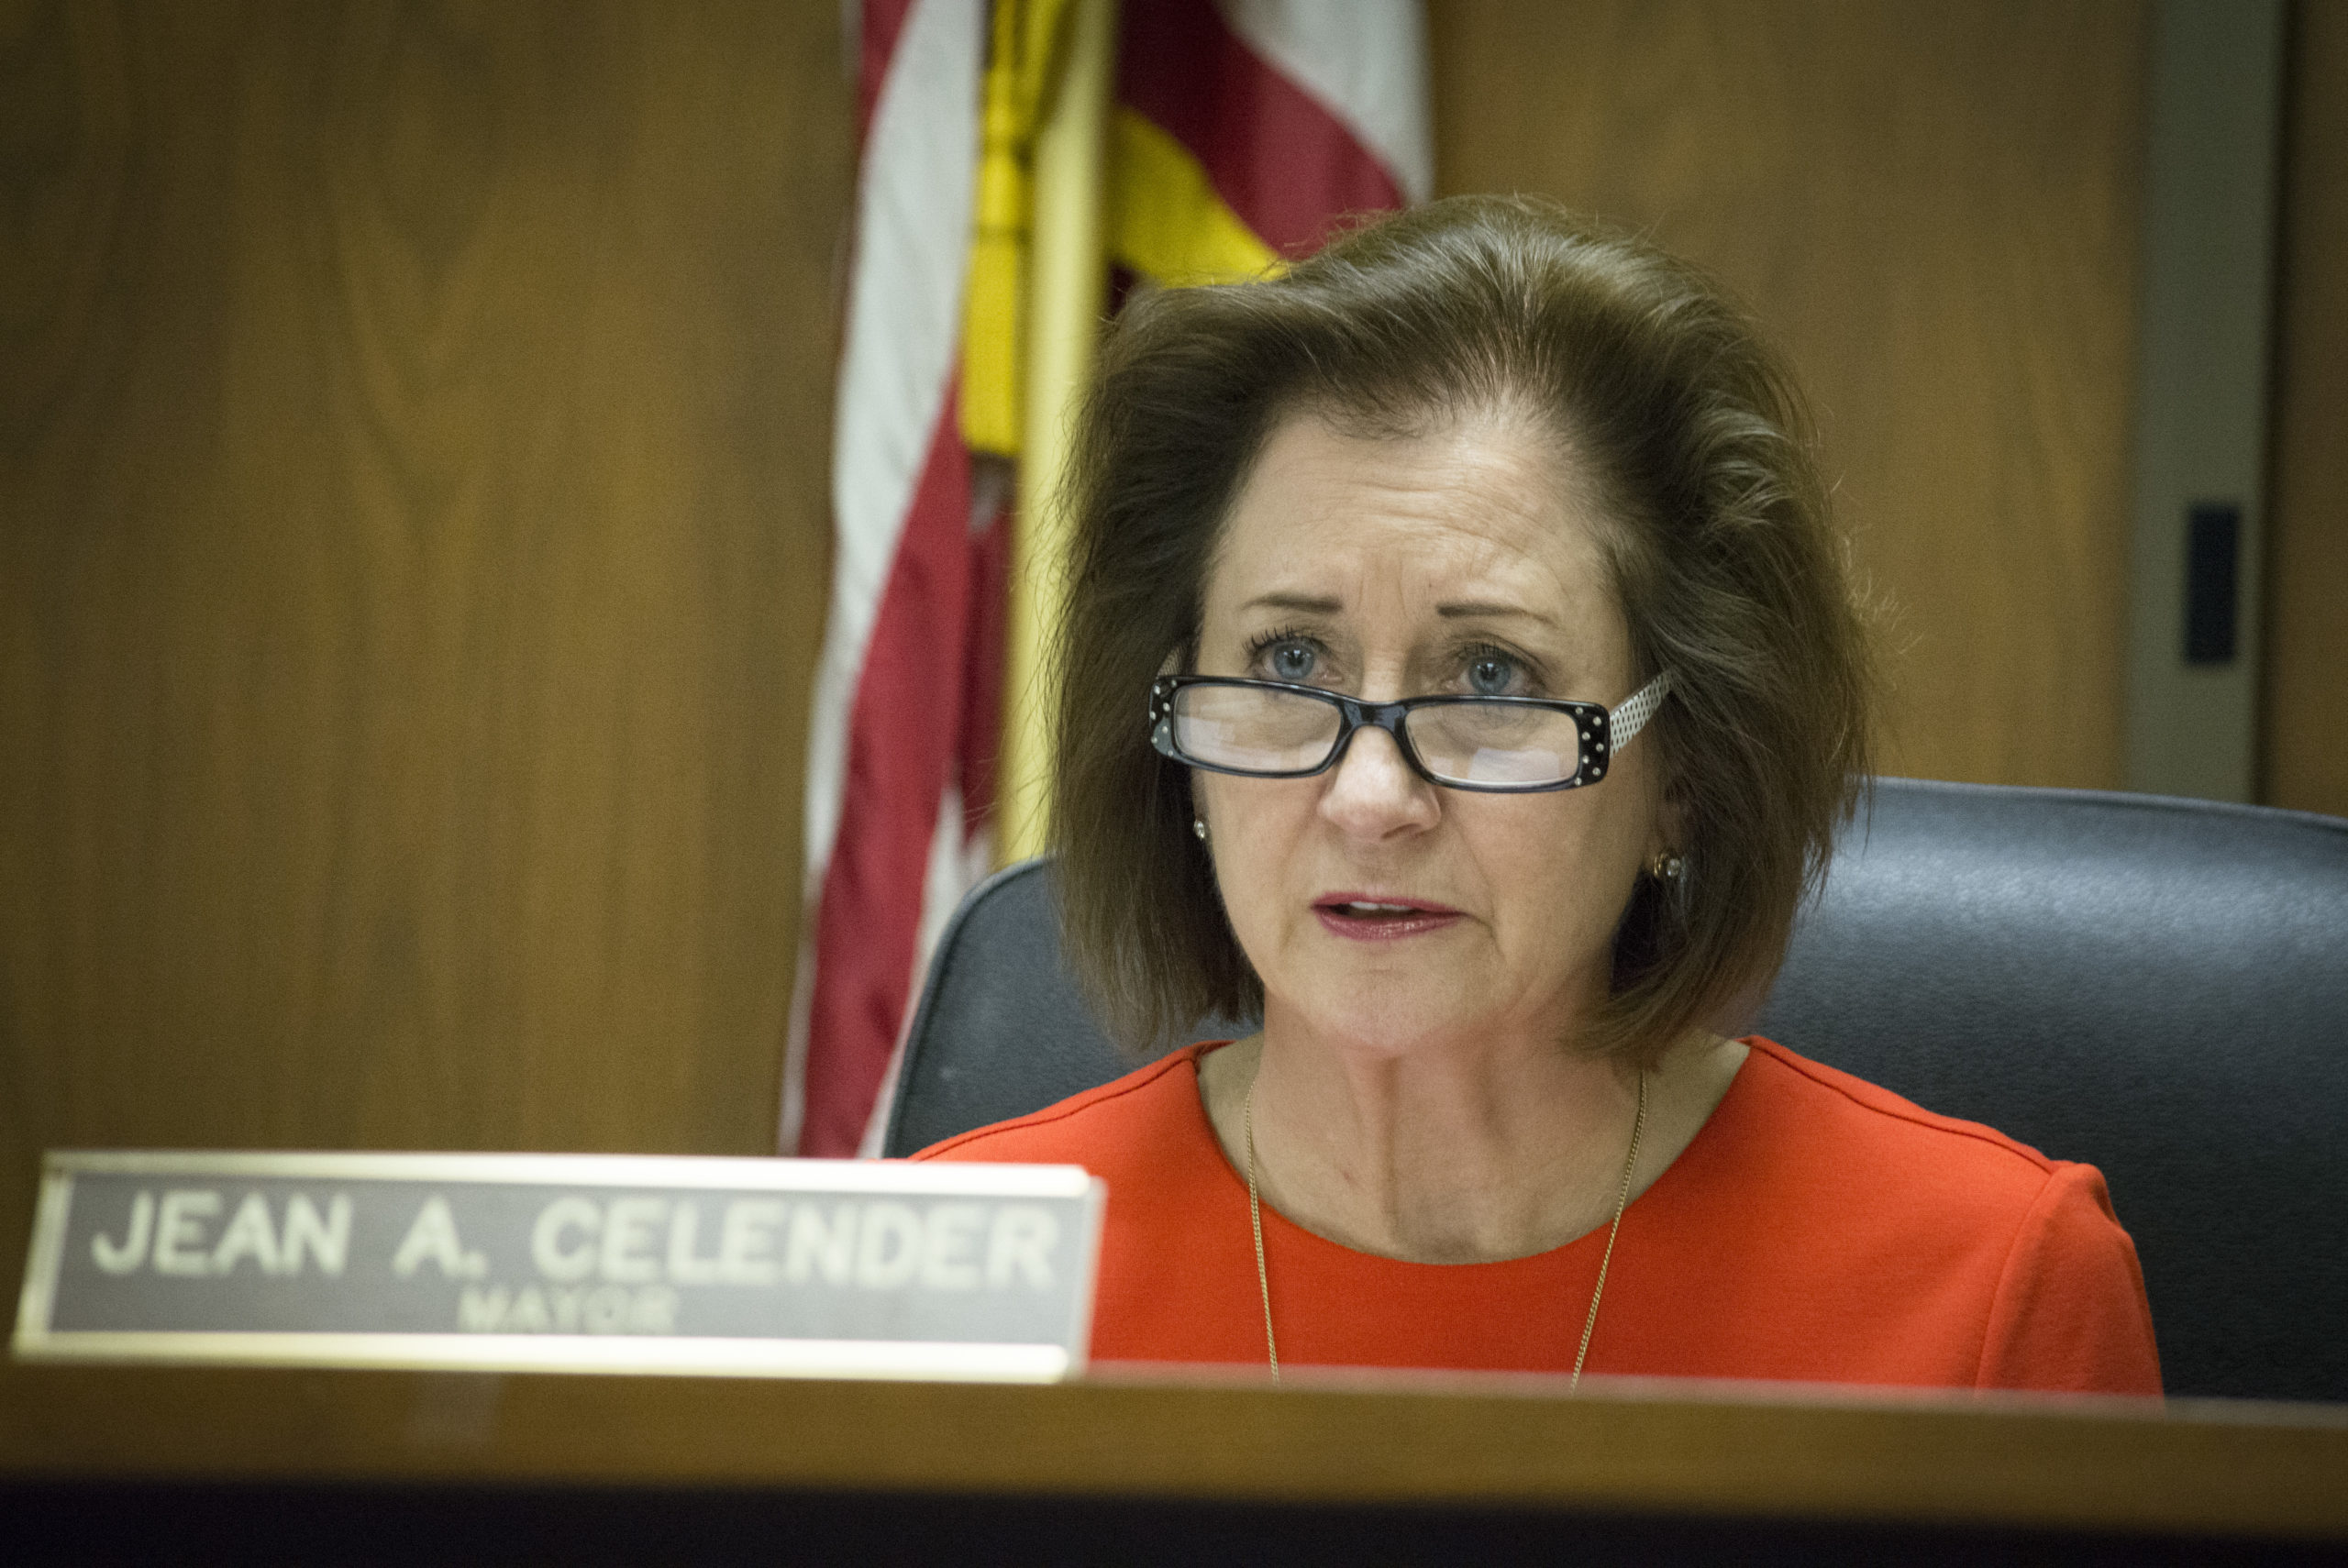 Great Neck Plaza Mayor Jean Celender, as seen here at a previous meeting, wants to implement stricter rules about completing projects on time. (Photo by Janelle Clausen)